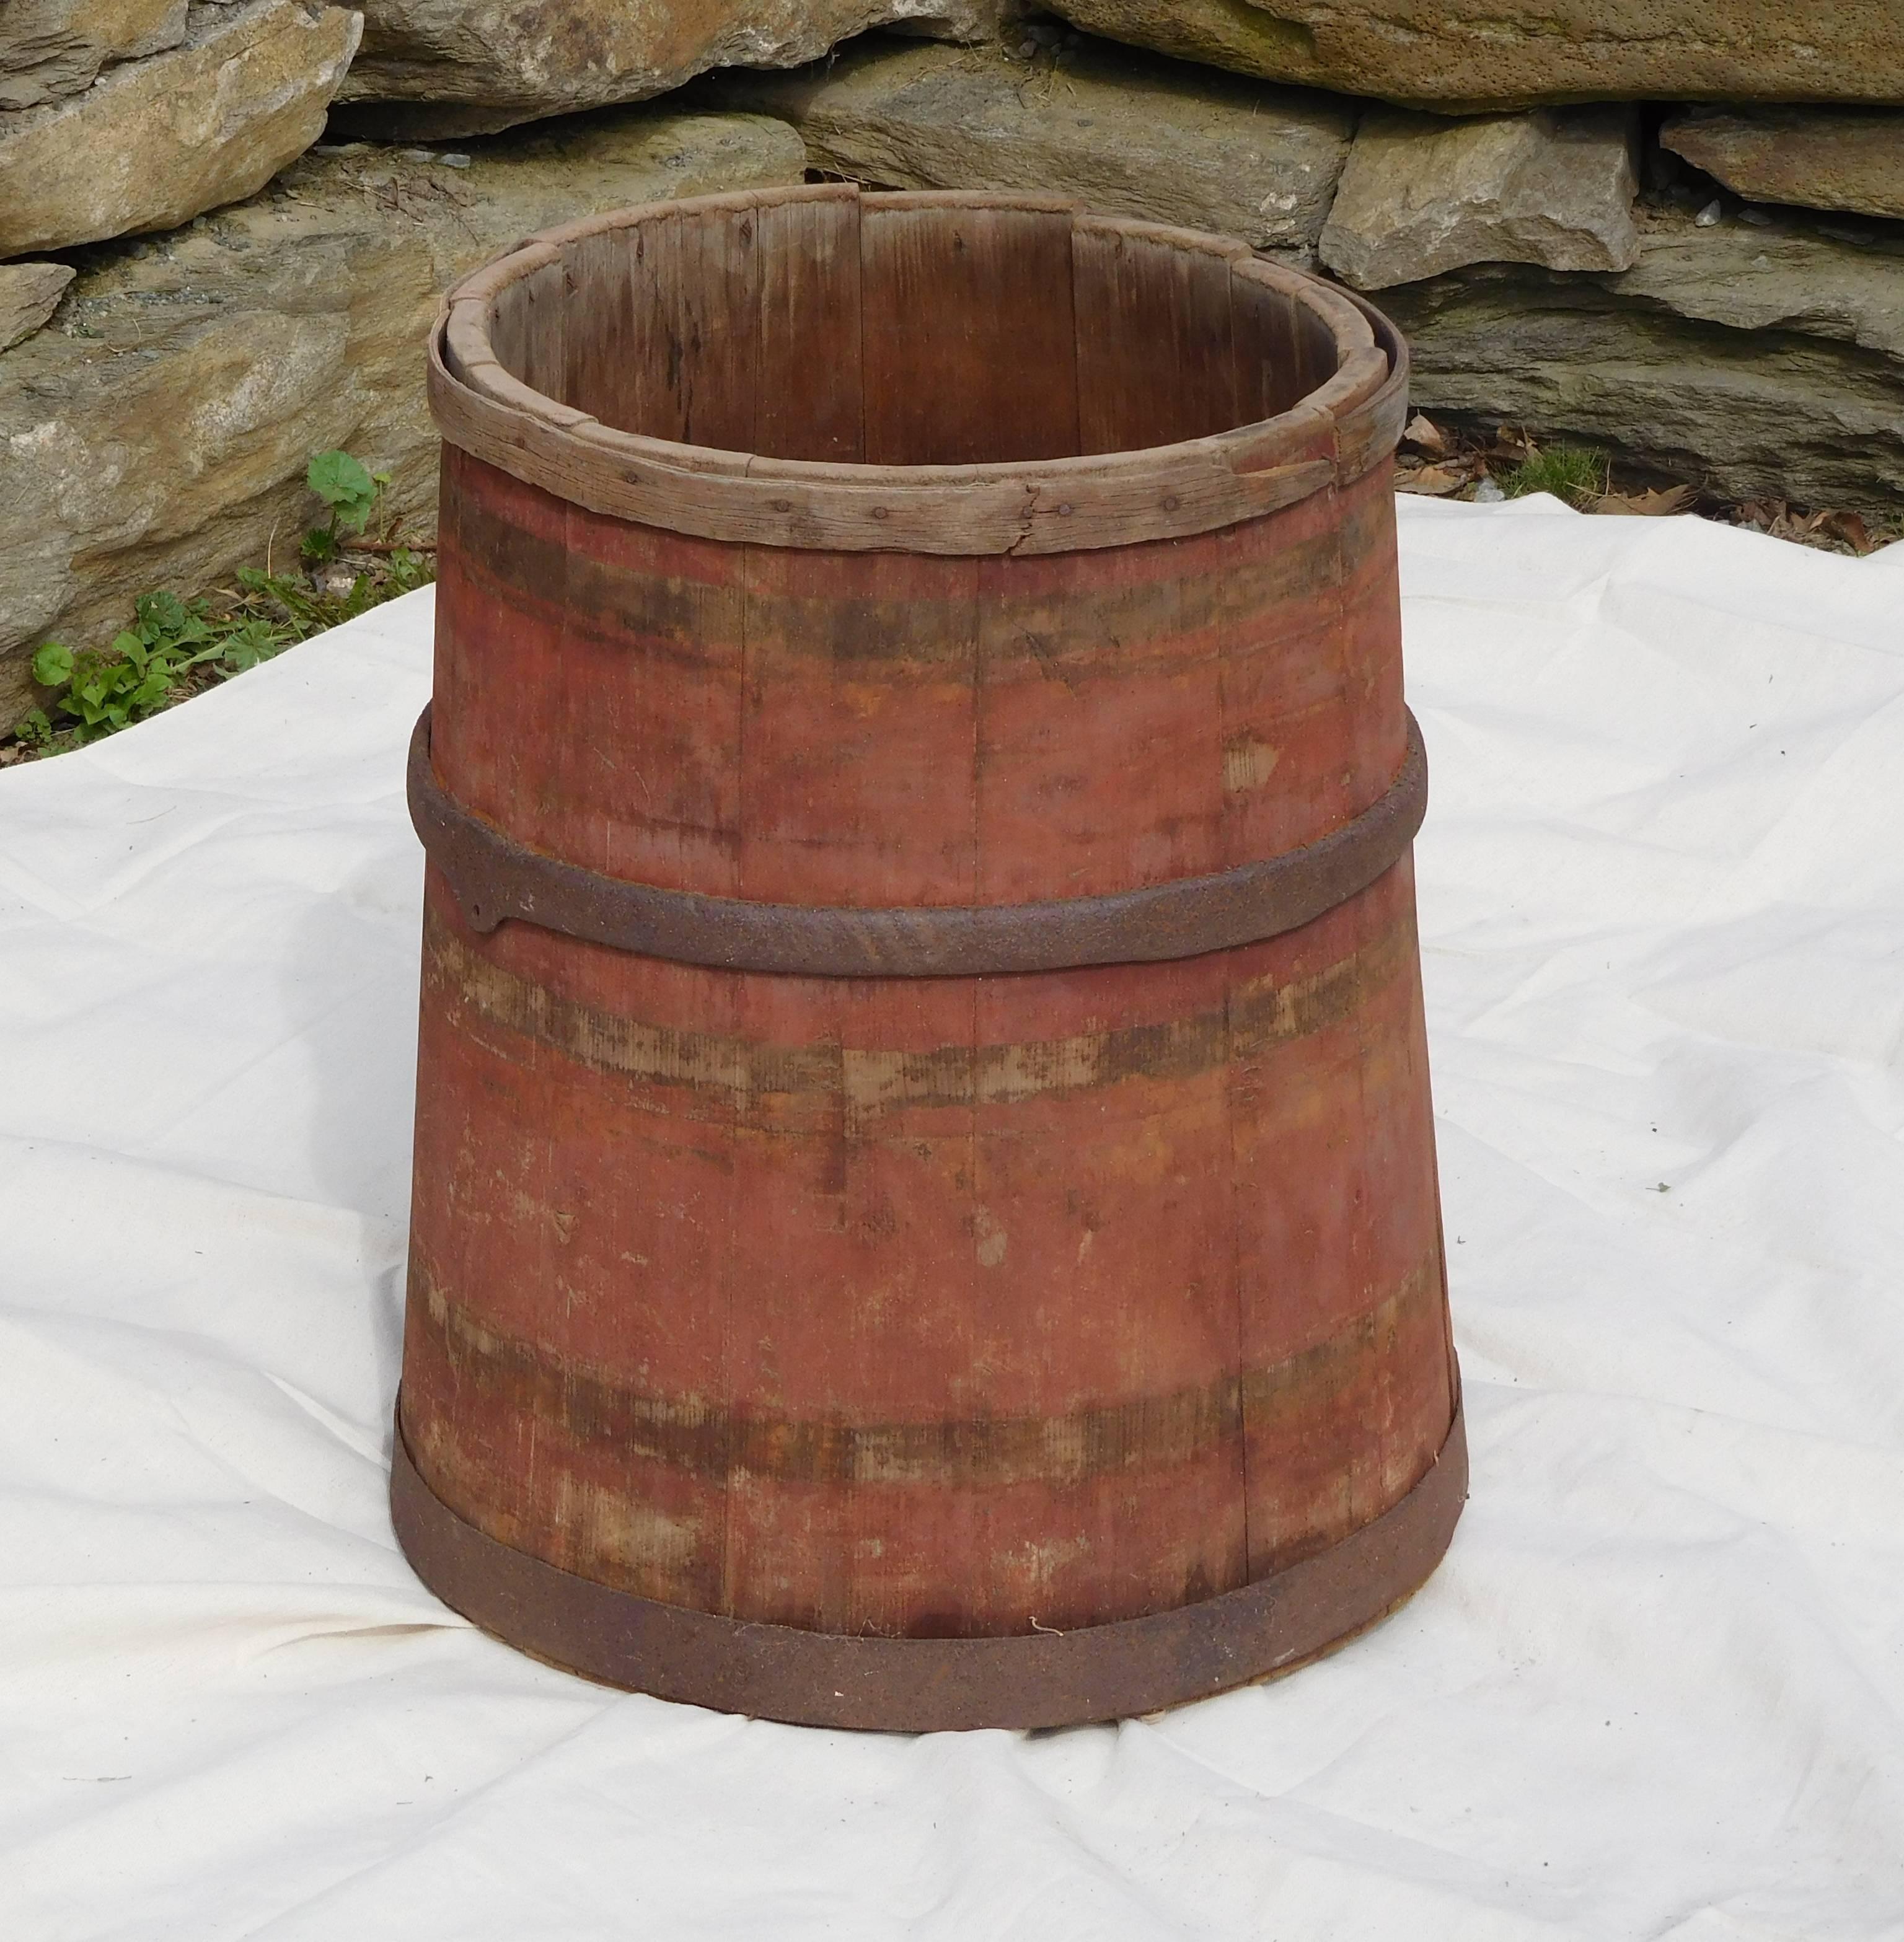 This large sap gathering barrel was used on a Vermont farm sledge to hold sap collected from the smaller tree buckets in the sugarbush, and then transported by horse or ox team back to the sugar shack for boiling down to maple syrup. It was a